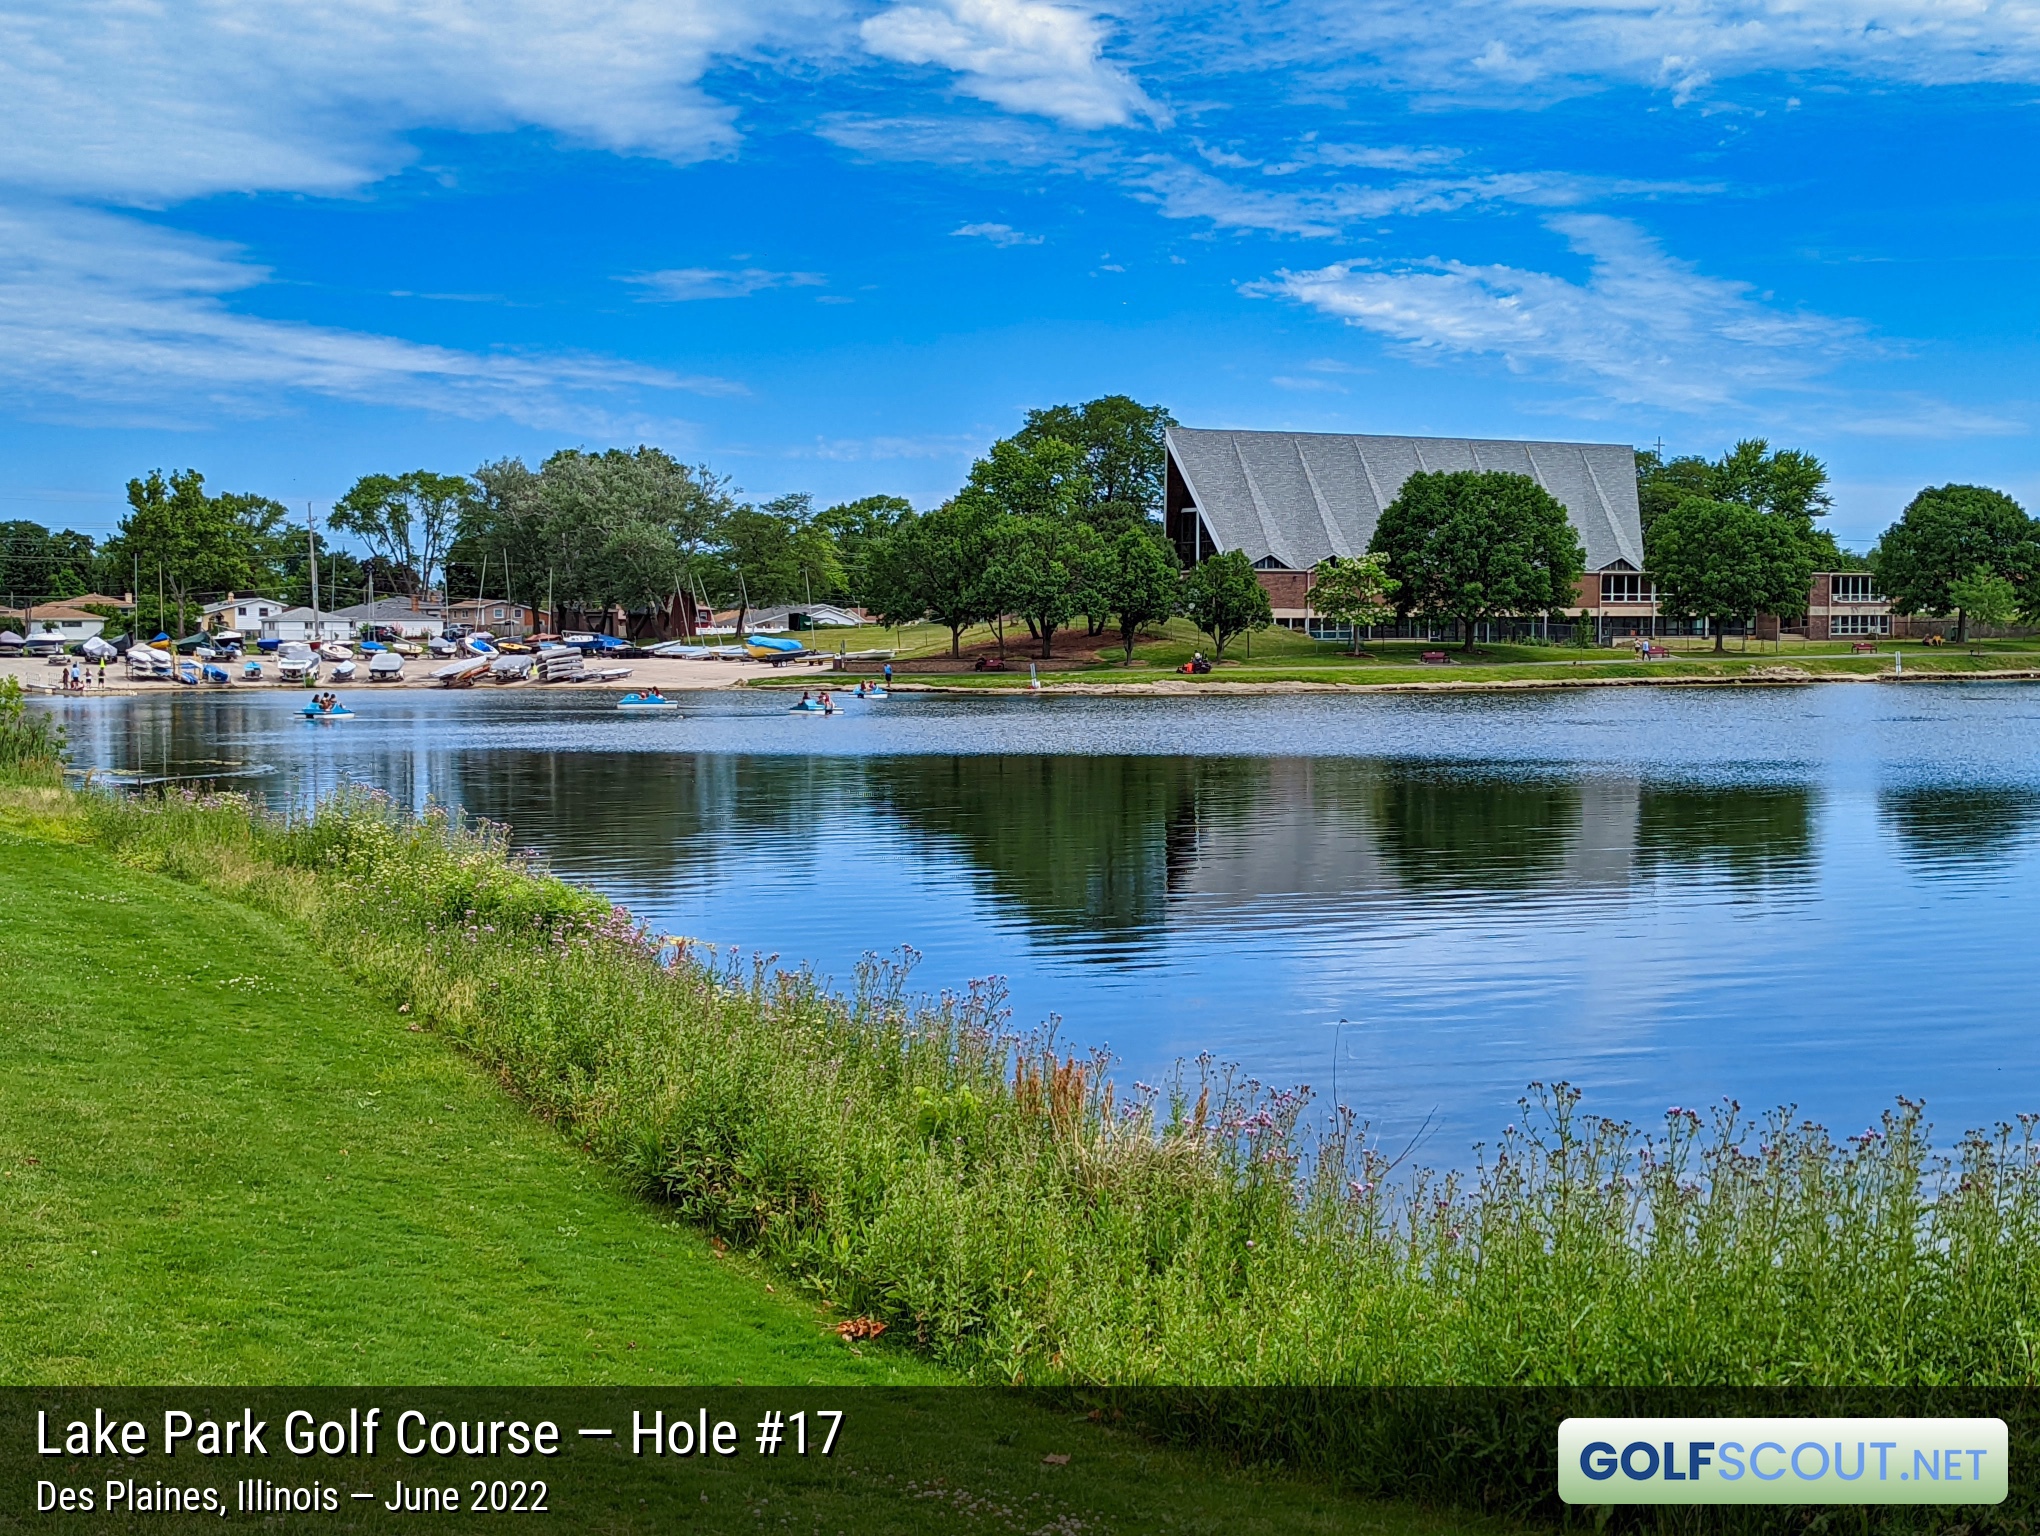 Photo of hole #17 at Lake Park Golf Course in Des Plaines, Illinois. 